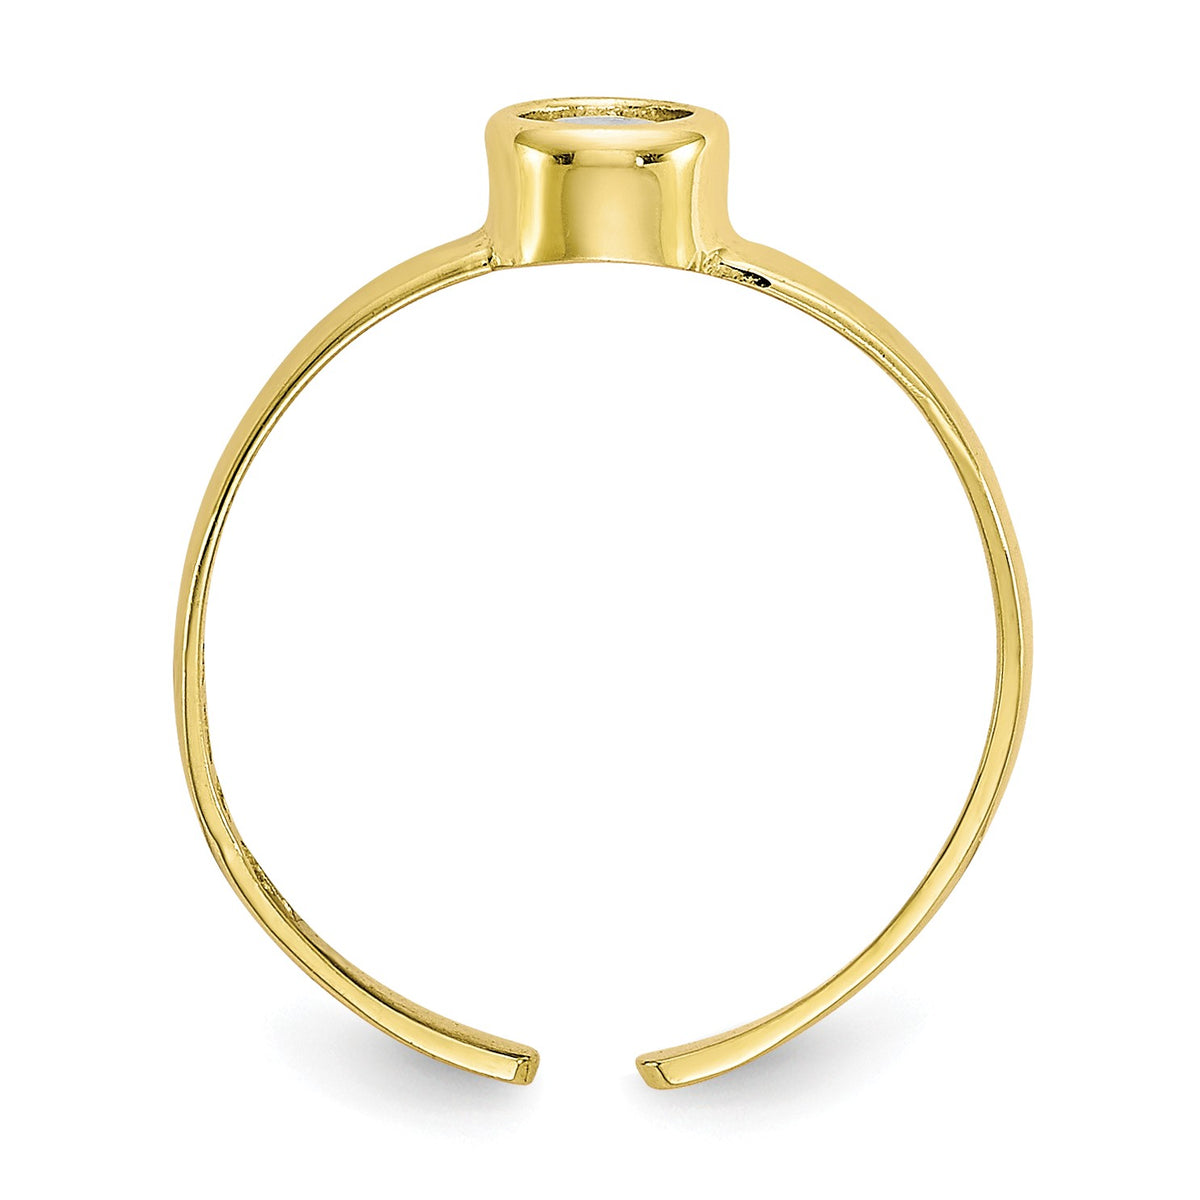 Alternate view of the Round Cubic Zirconia Solitaire Toe Ring in 10 Karat Yellow Gold by The Black Bow Jewelry Co.